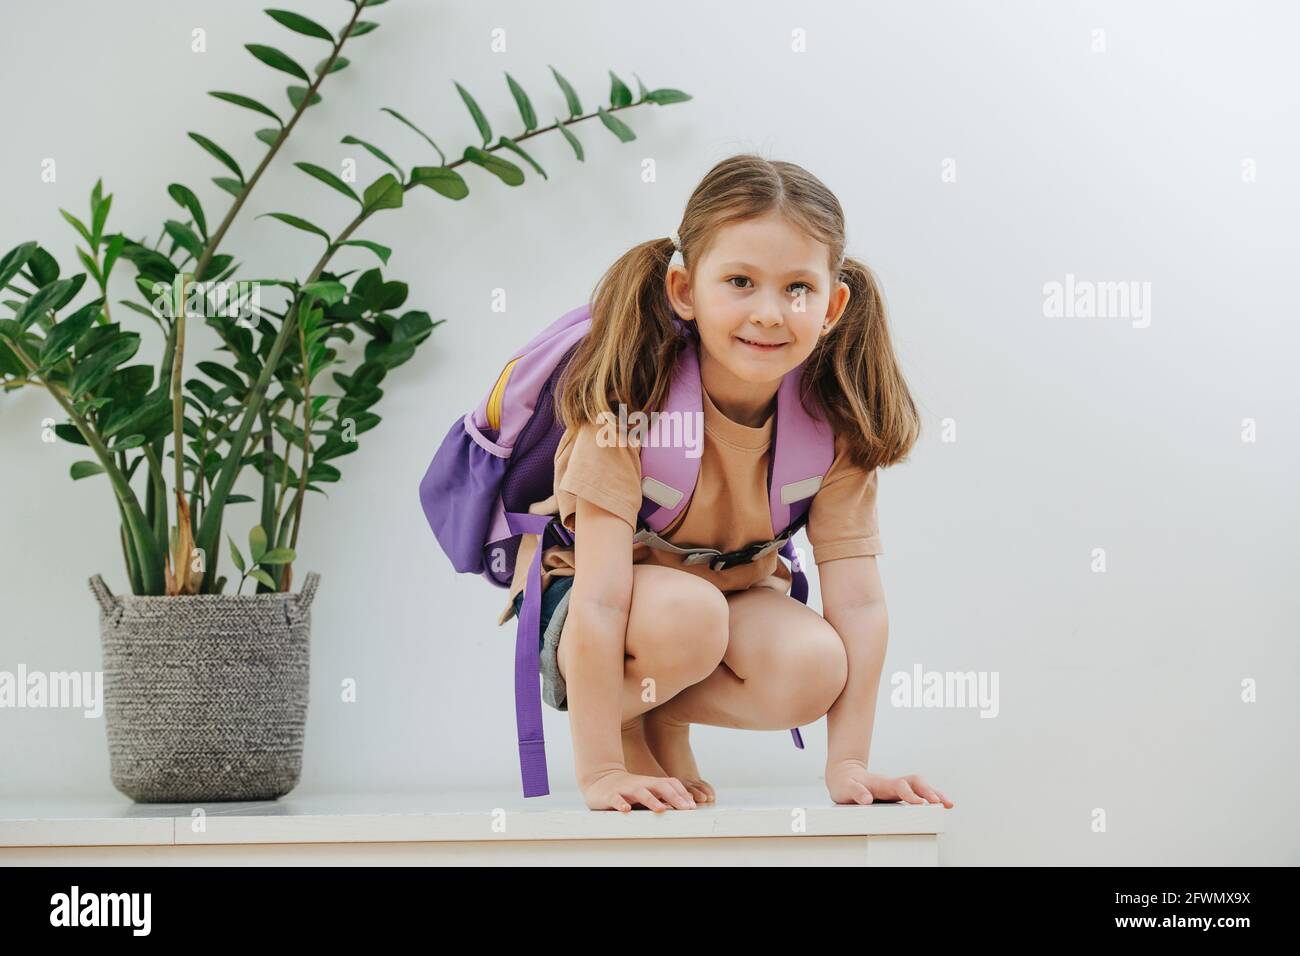 Playful little schoolgirl on a white table with purple backpack. Over white Stock Photo